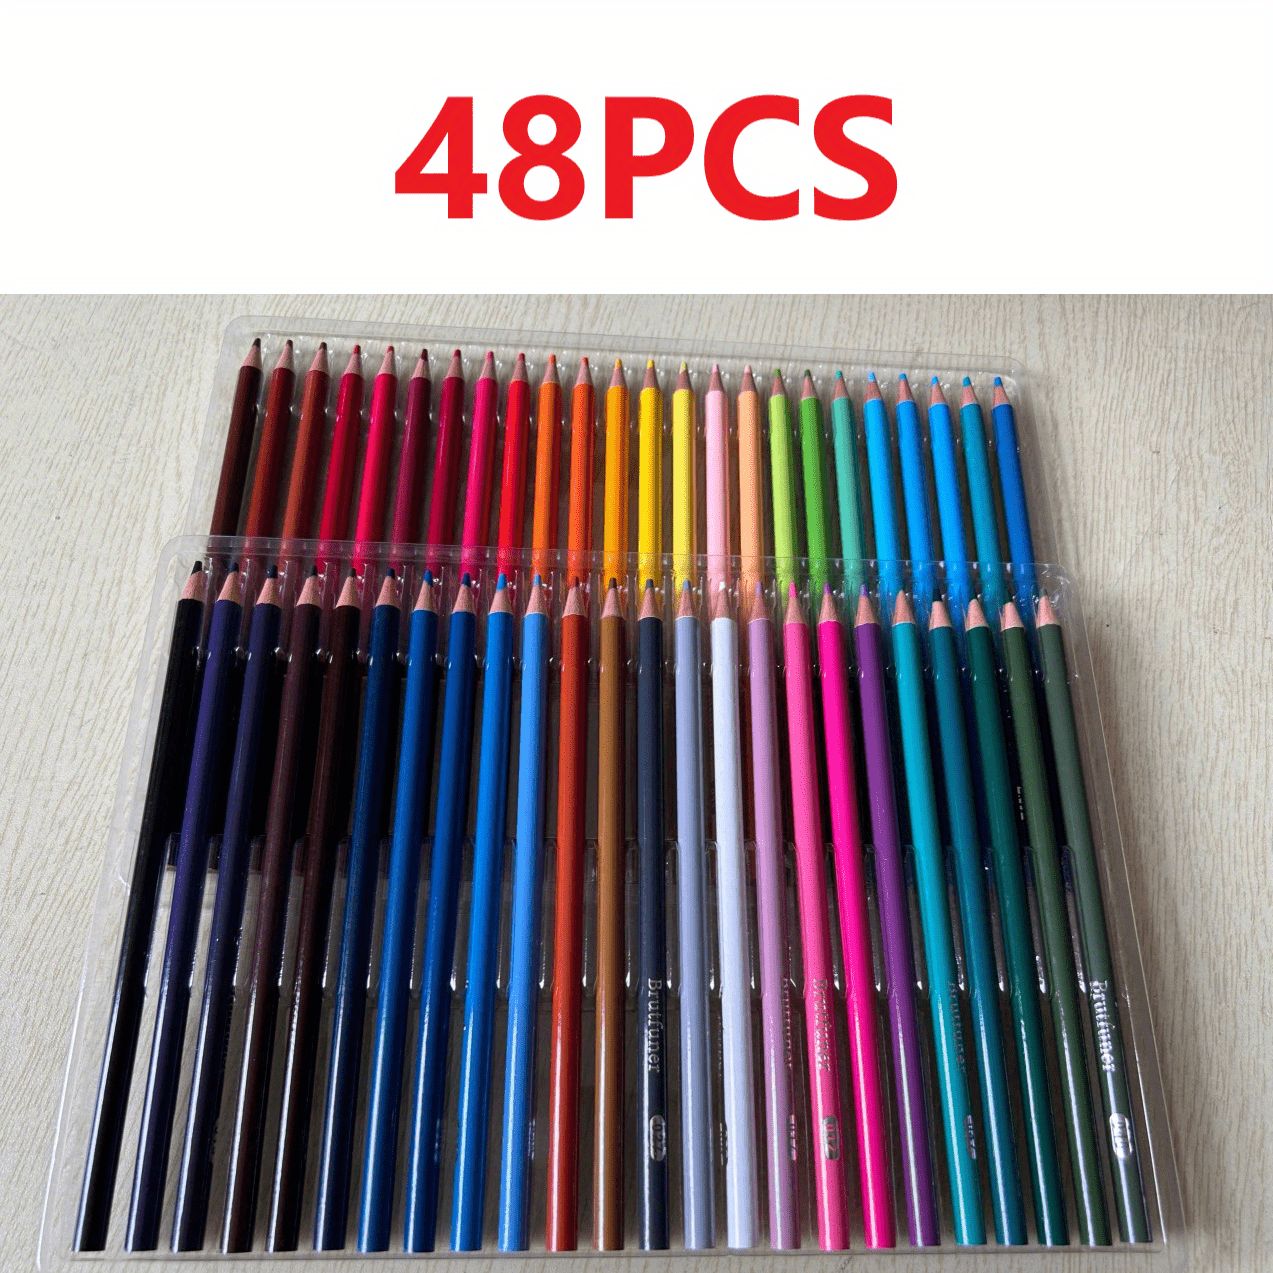 180 Colored Wooden,Oil Pencils with Round Barrels for  Coloring,Sketching,Paintin